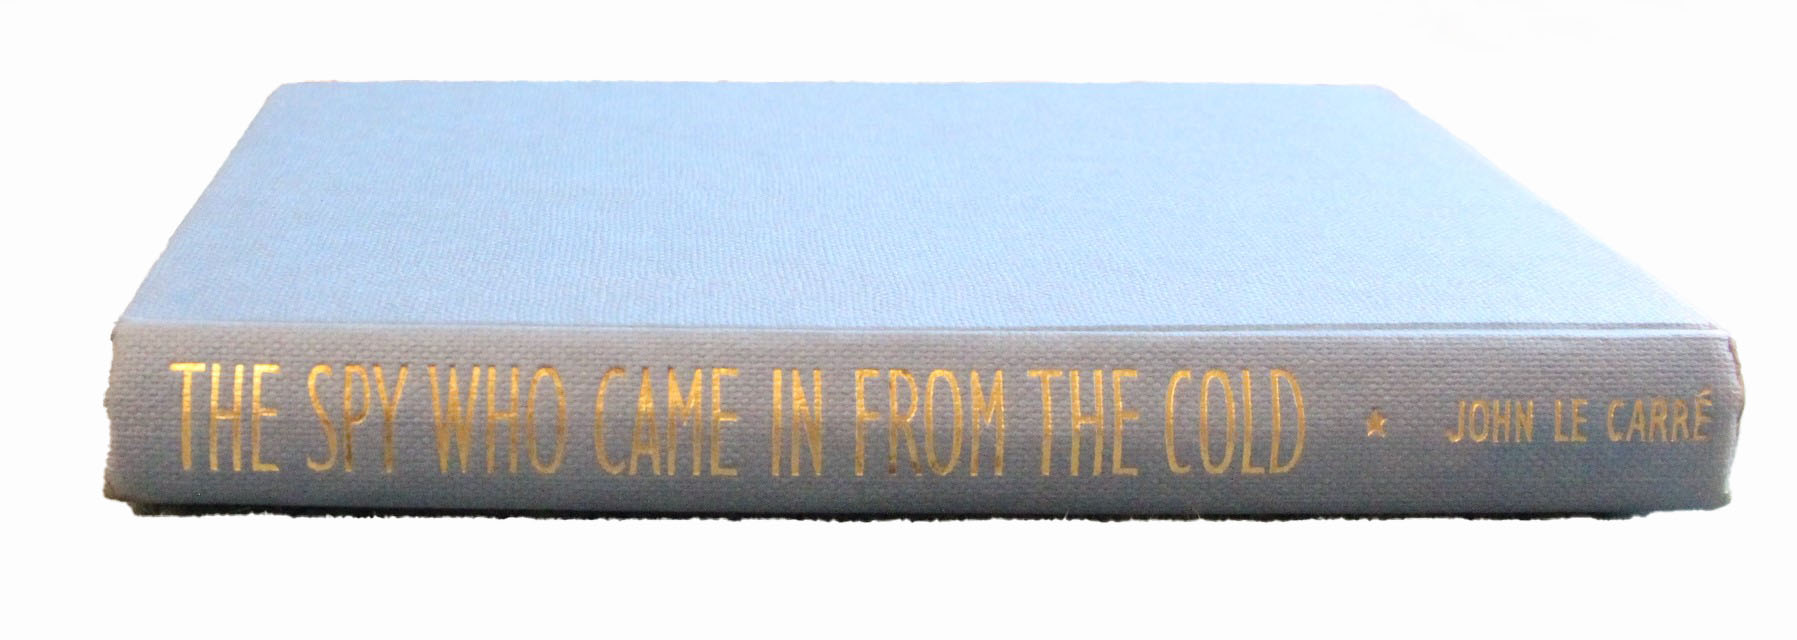 John Le Carre. The Spy Who Came From Elsewhere. Gollancz. 1st edition 1963. Dust wrapper, slightly - Image 3 of 8